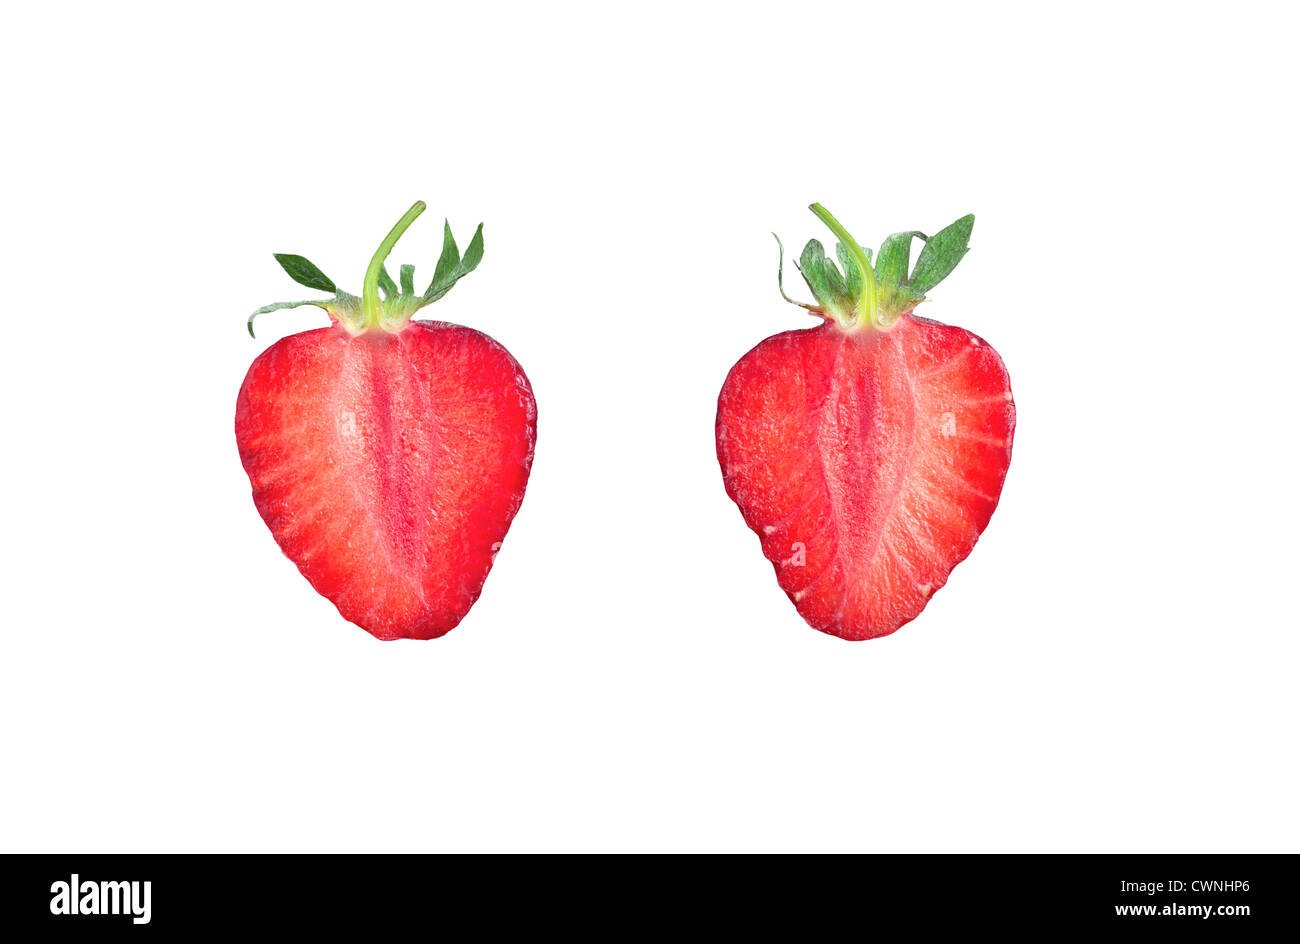 Strawberry cut in halves, isolated on 100% white background Stock Photo